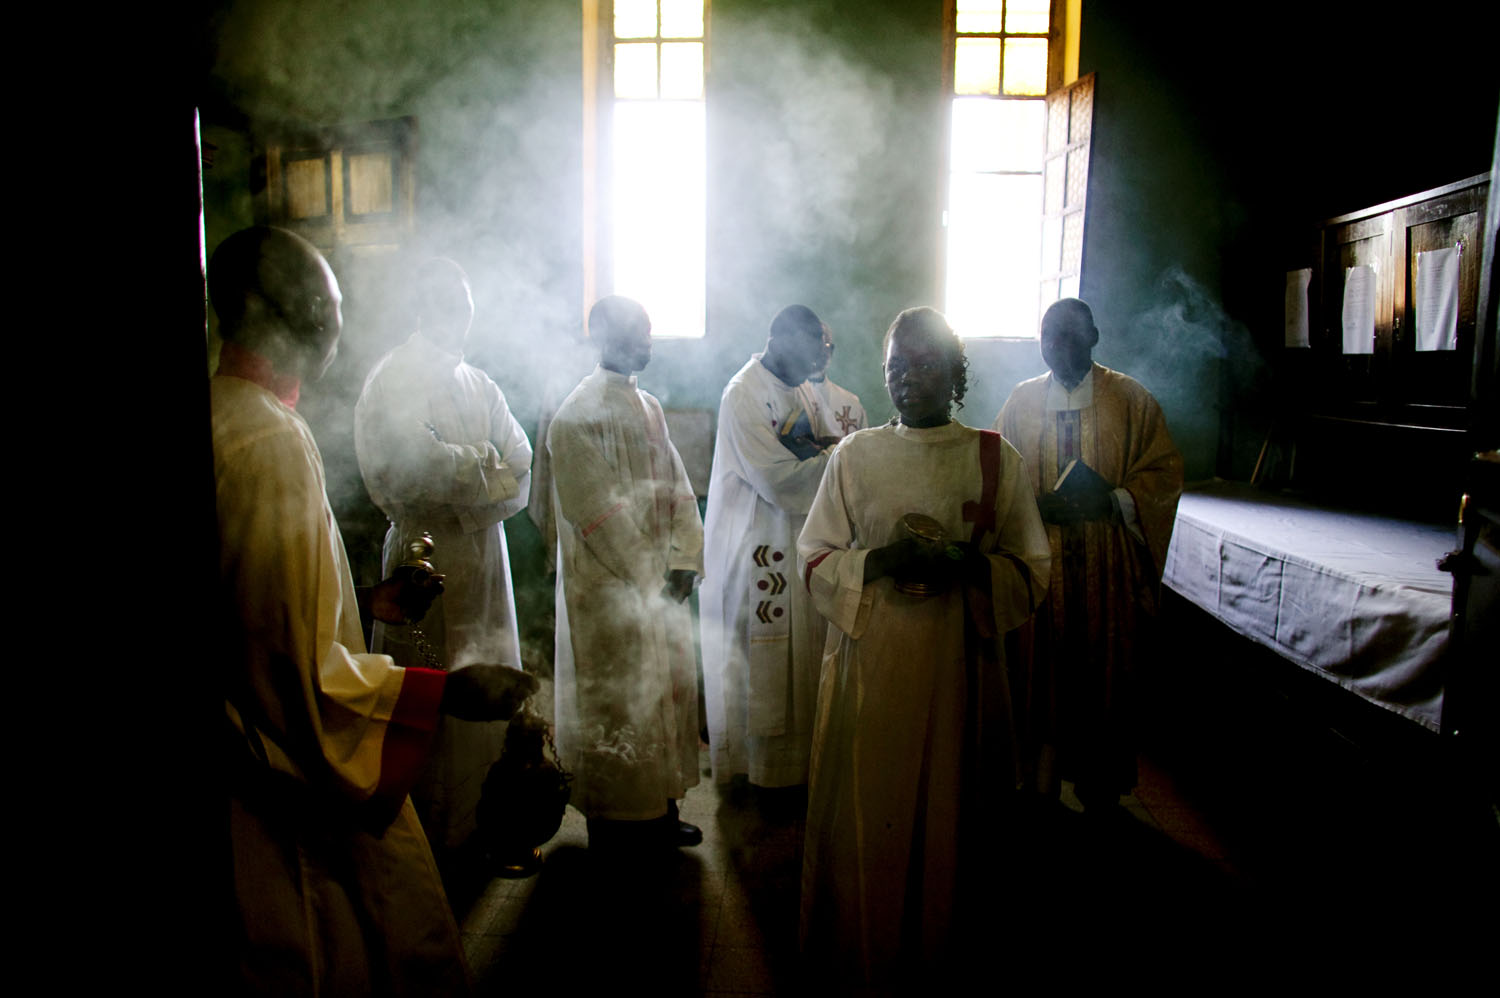 Southern Sudanese Catholics prepare for Easter mass in Wau, the south's second largest city. Christianity is a vital component of southern identity and was significant source of conflict between southern tribes and the northern, Islamic government in Khartoum. The north's historic imposition of Islamic law throughout the south was a grievance that helped to galvanize the southern liberation movement.